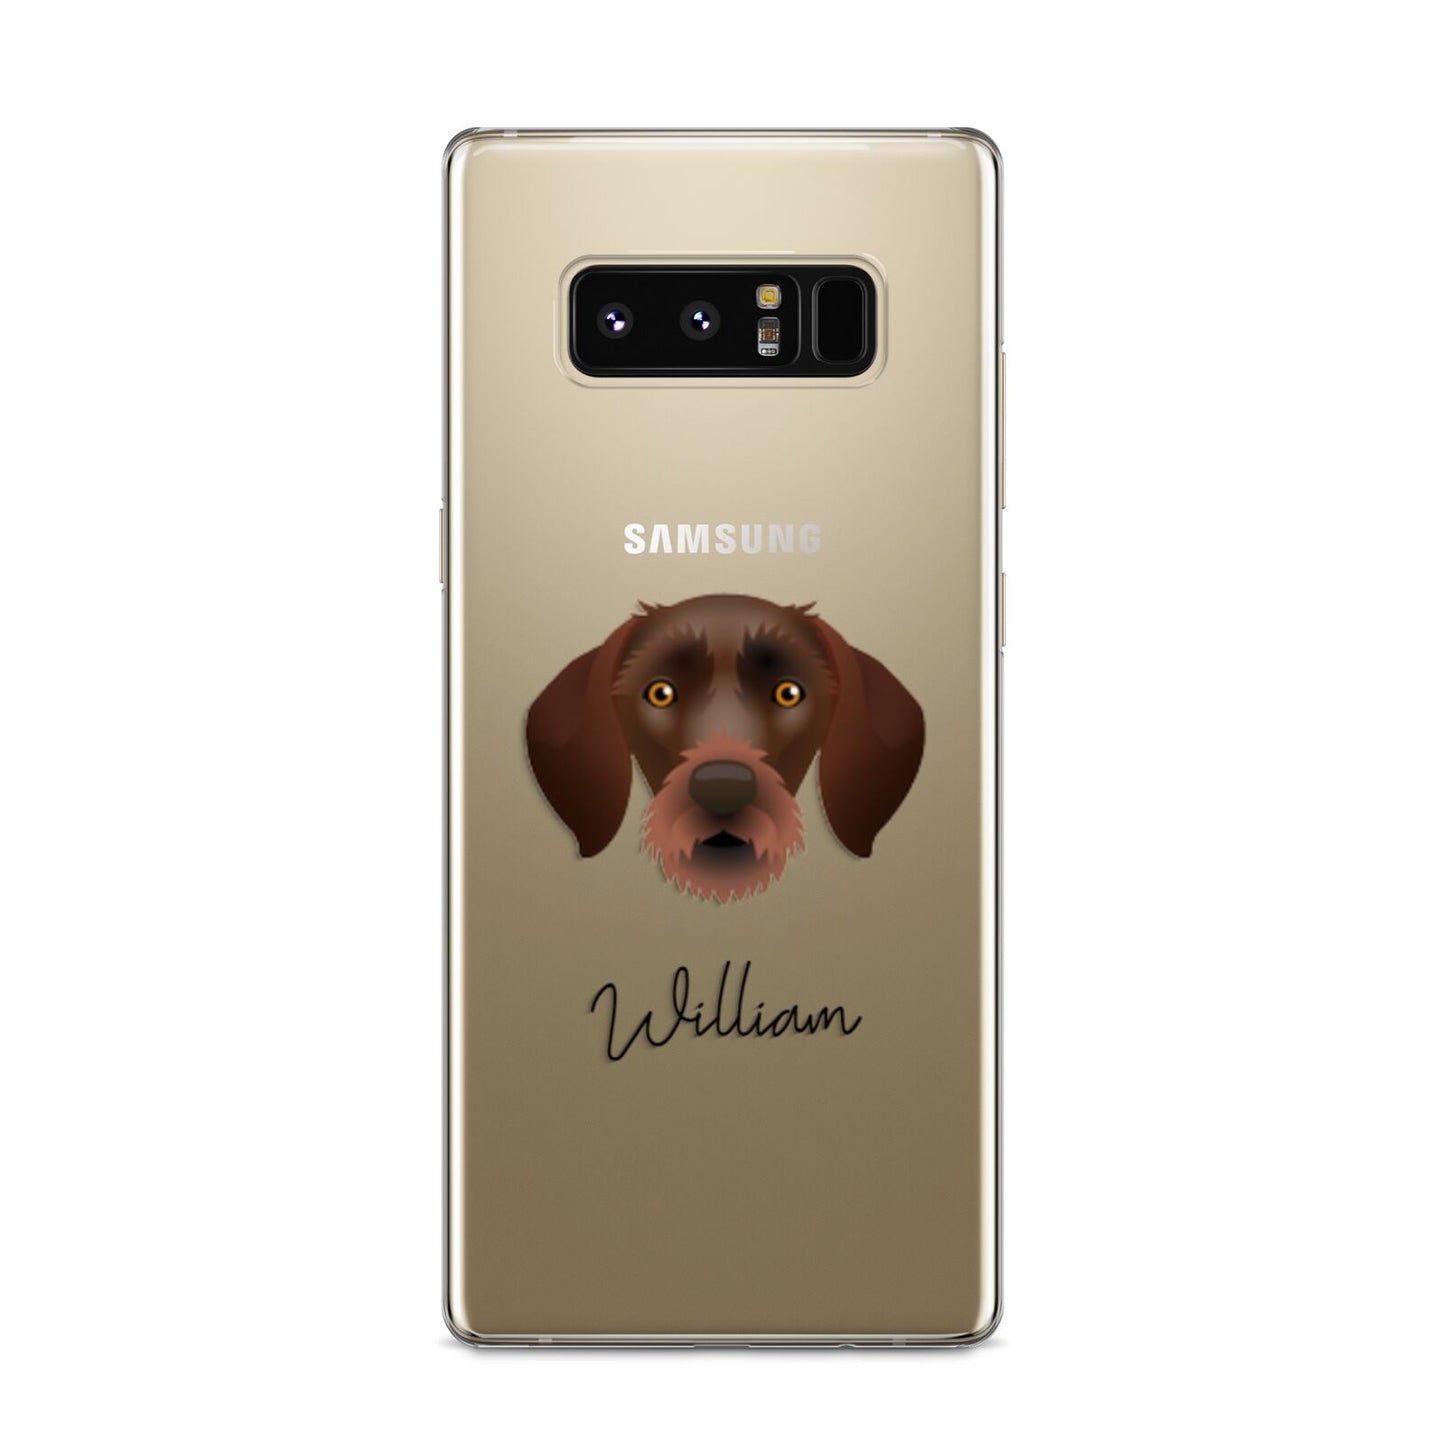 German Wirehaired Pointer Personalised Samsung Galaxy S8 Case